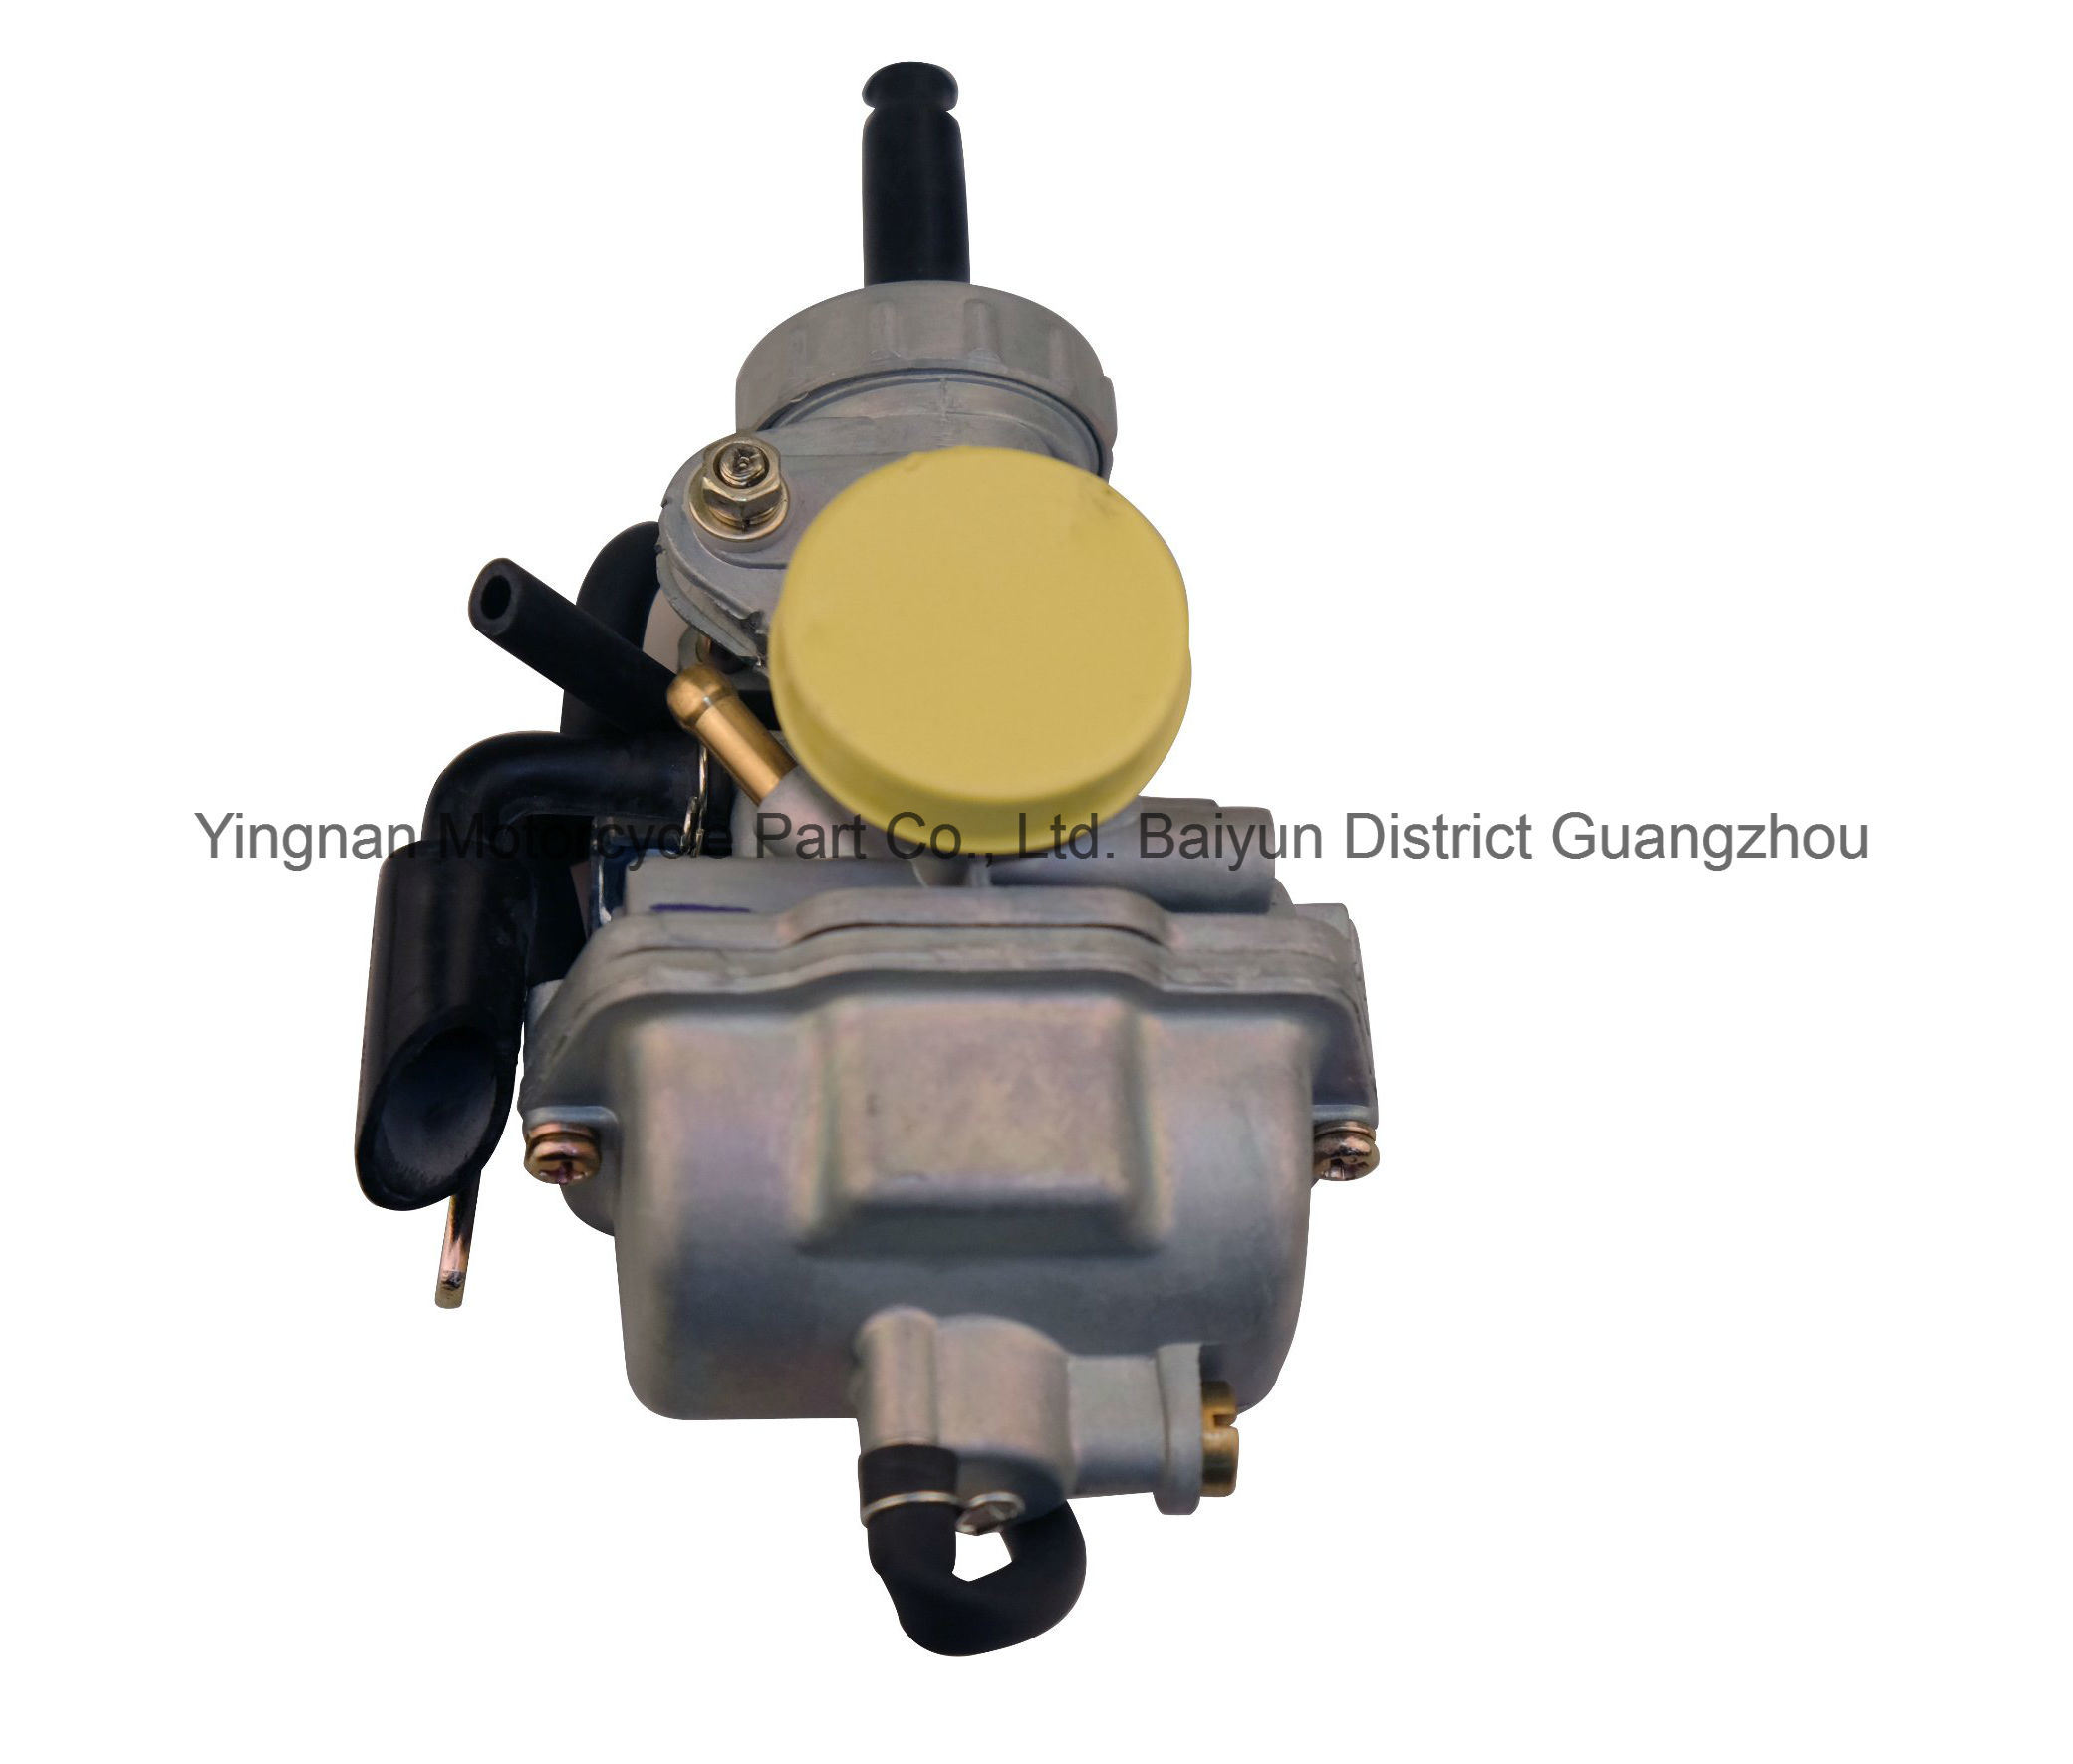 Motorcycle Accessory Motorcycle Engine Carburetor for Jh70